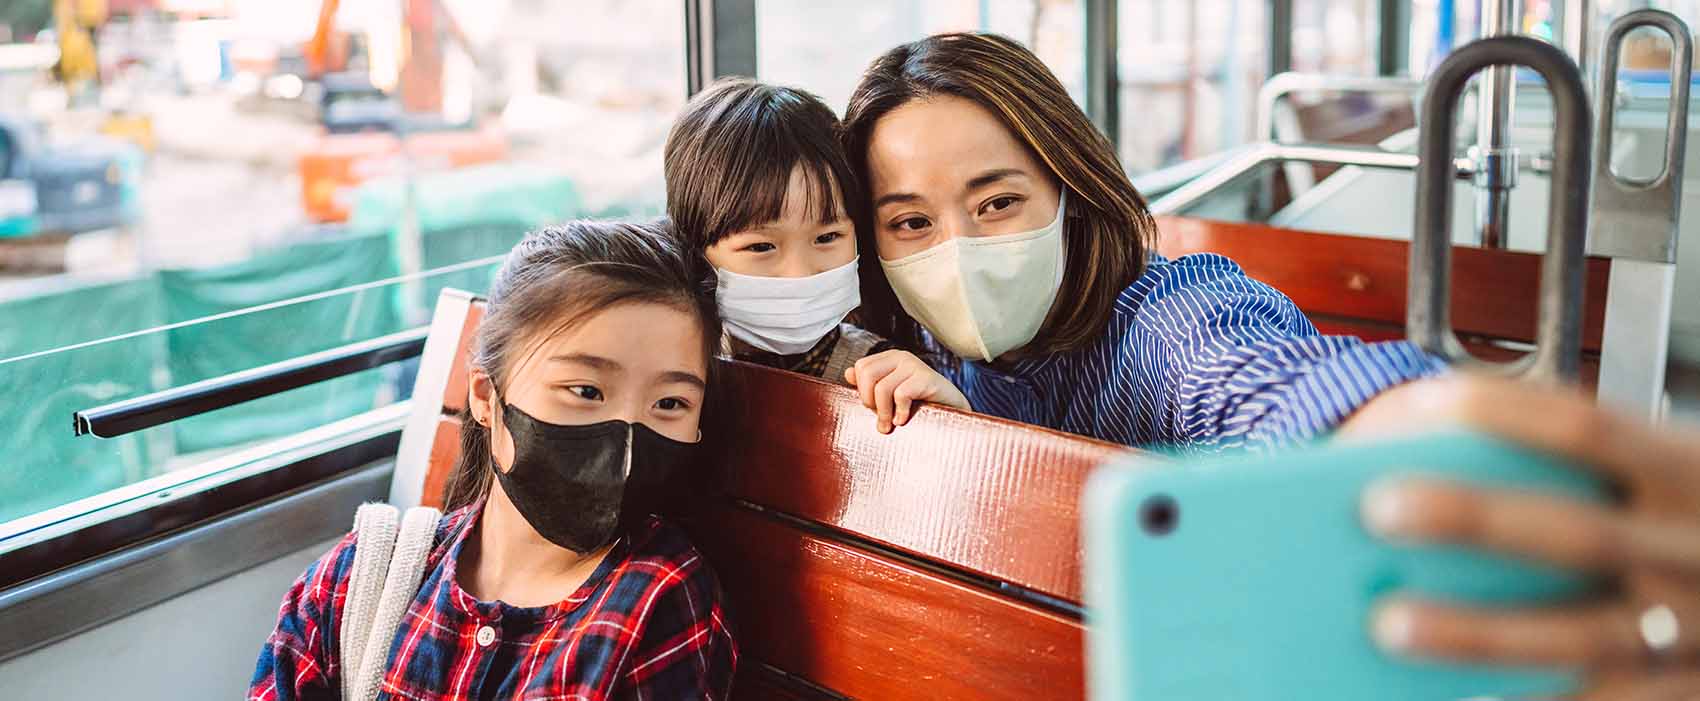 mom and daughters in protective face masks taking selfies using smartphone while riding on local city tram